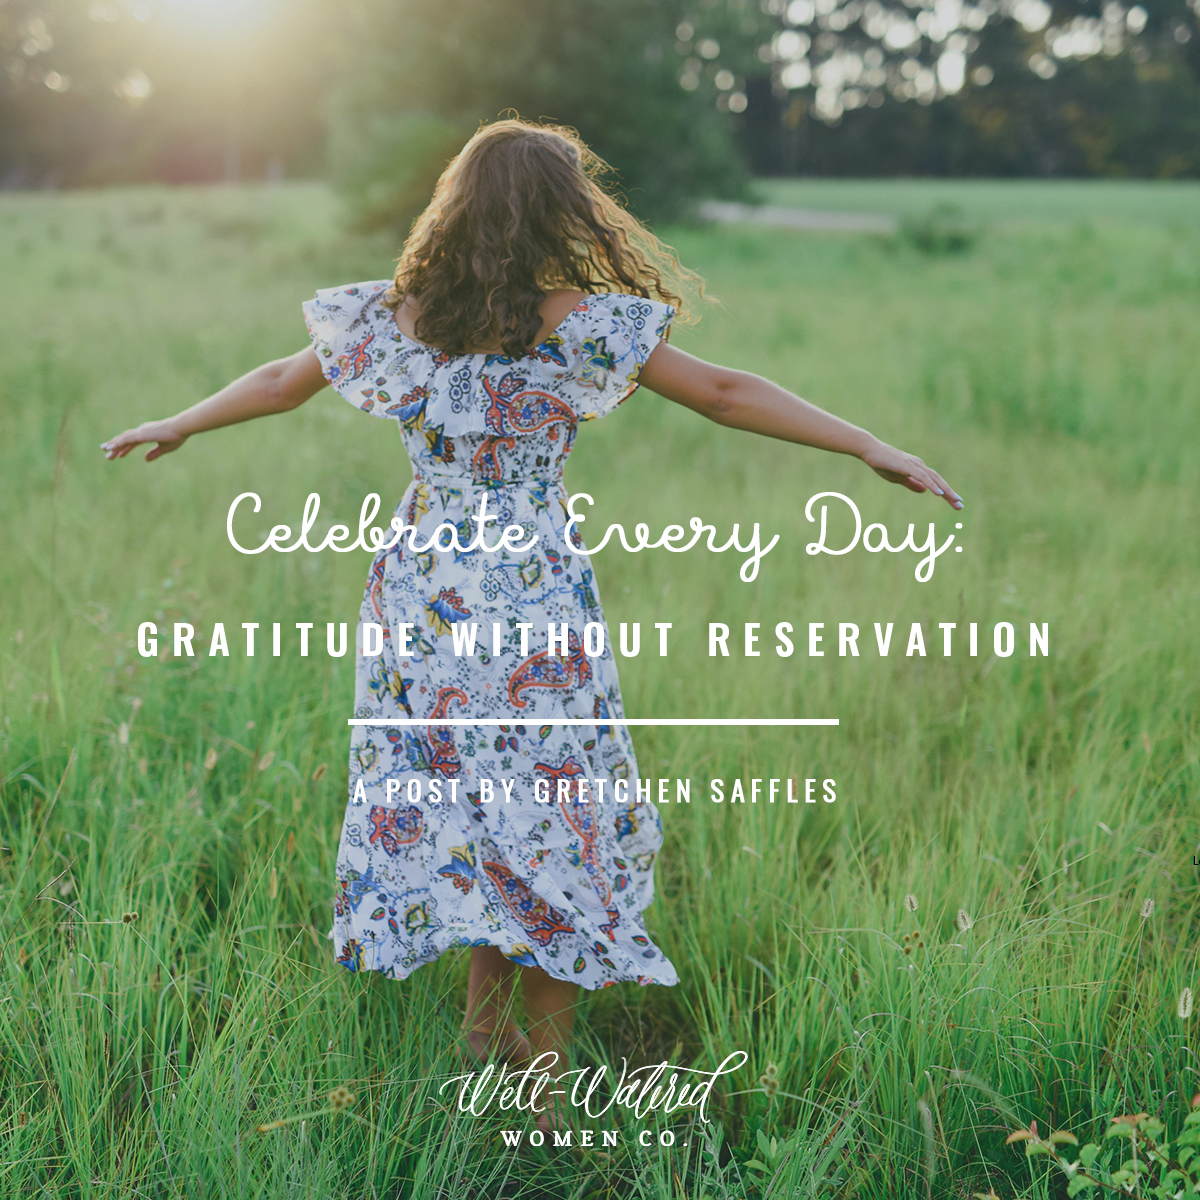 Well-Watered Women Blog-Celebrate Every Day-Gratitude Without Reservation